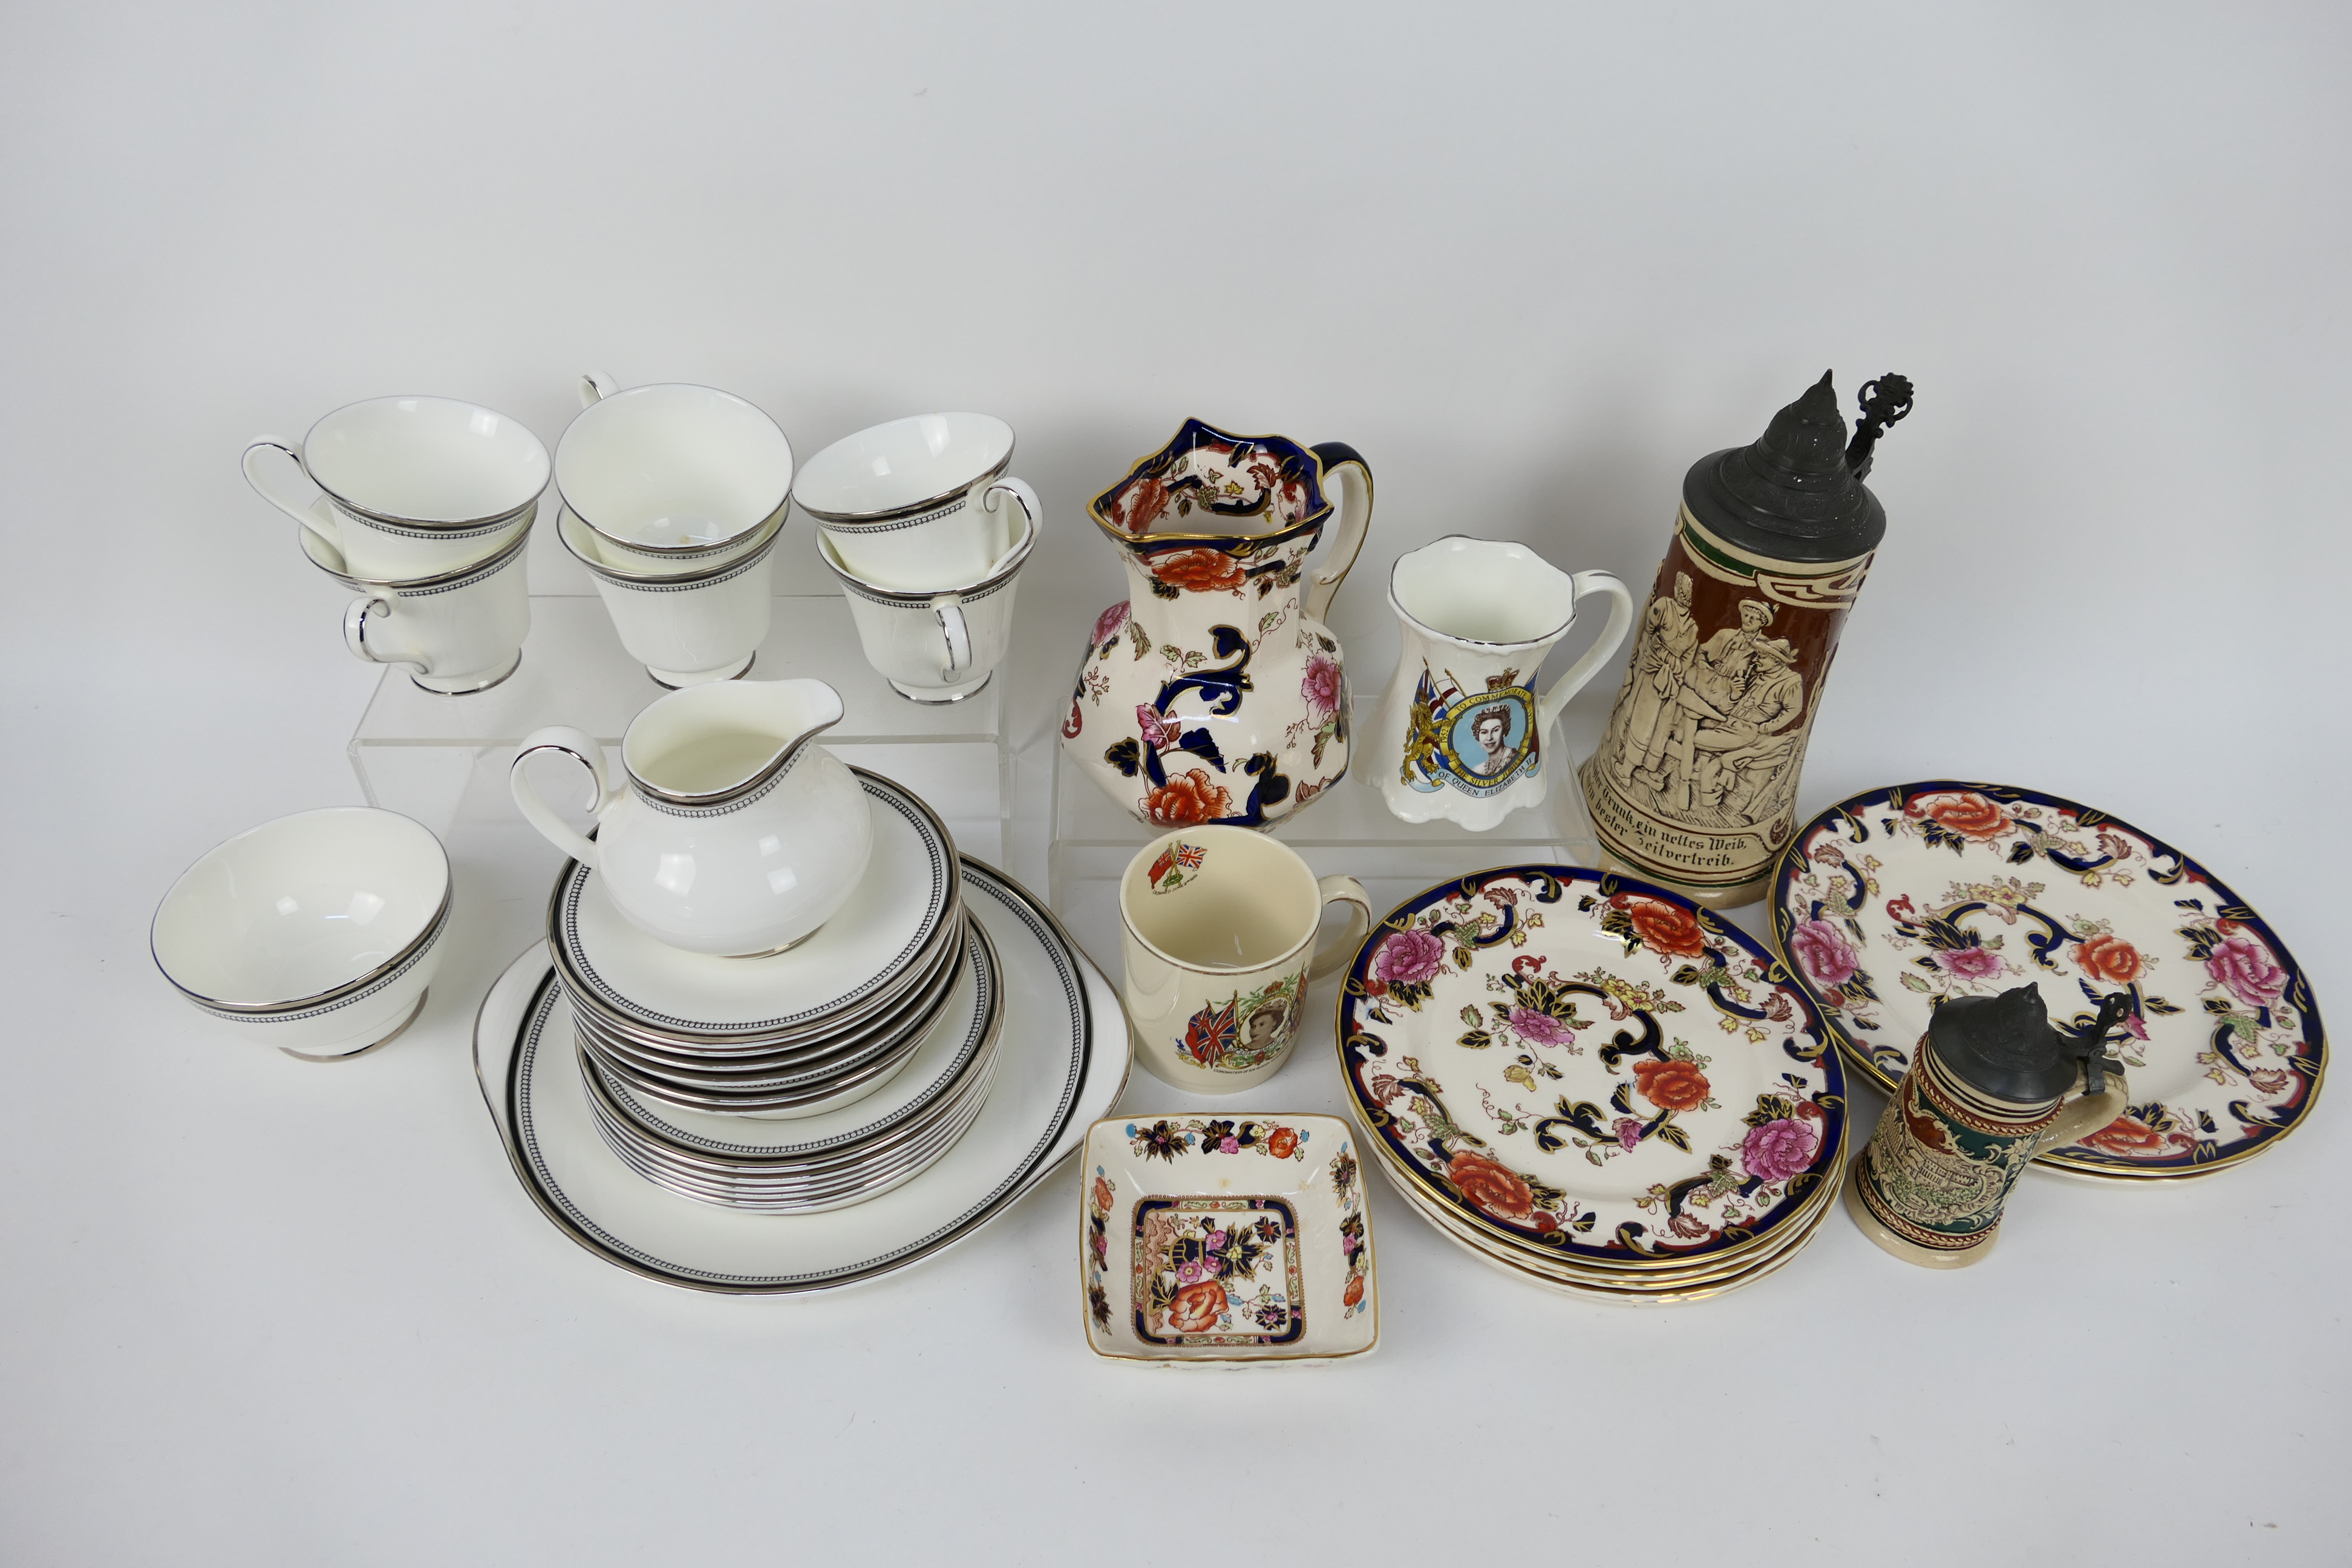 Ceramics to include Royal Doulton tea wares in the Sarabande pattern # H5023,